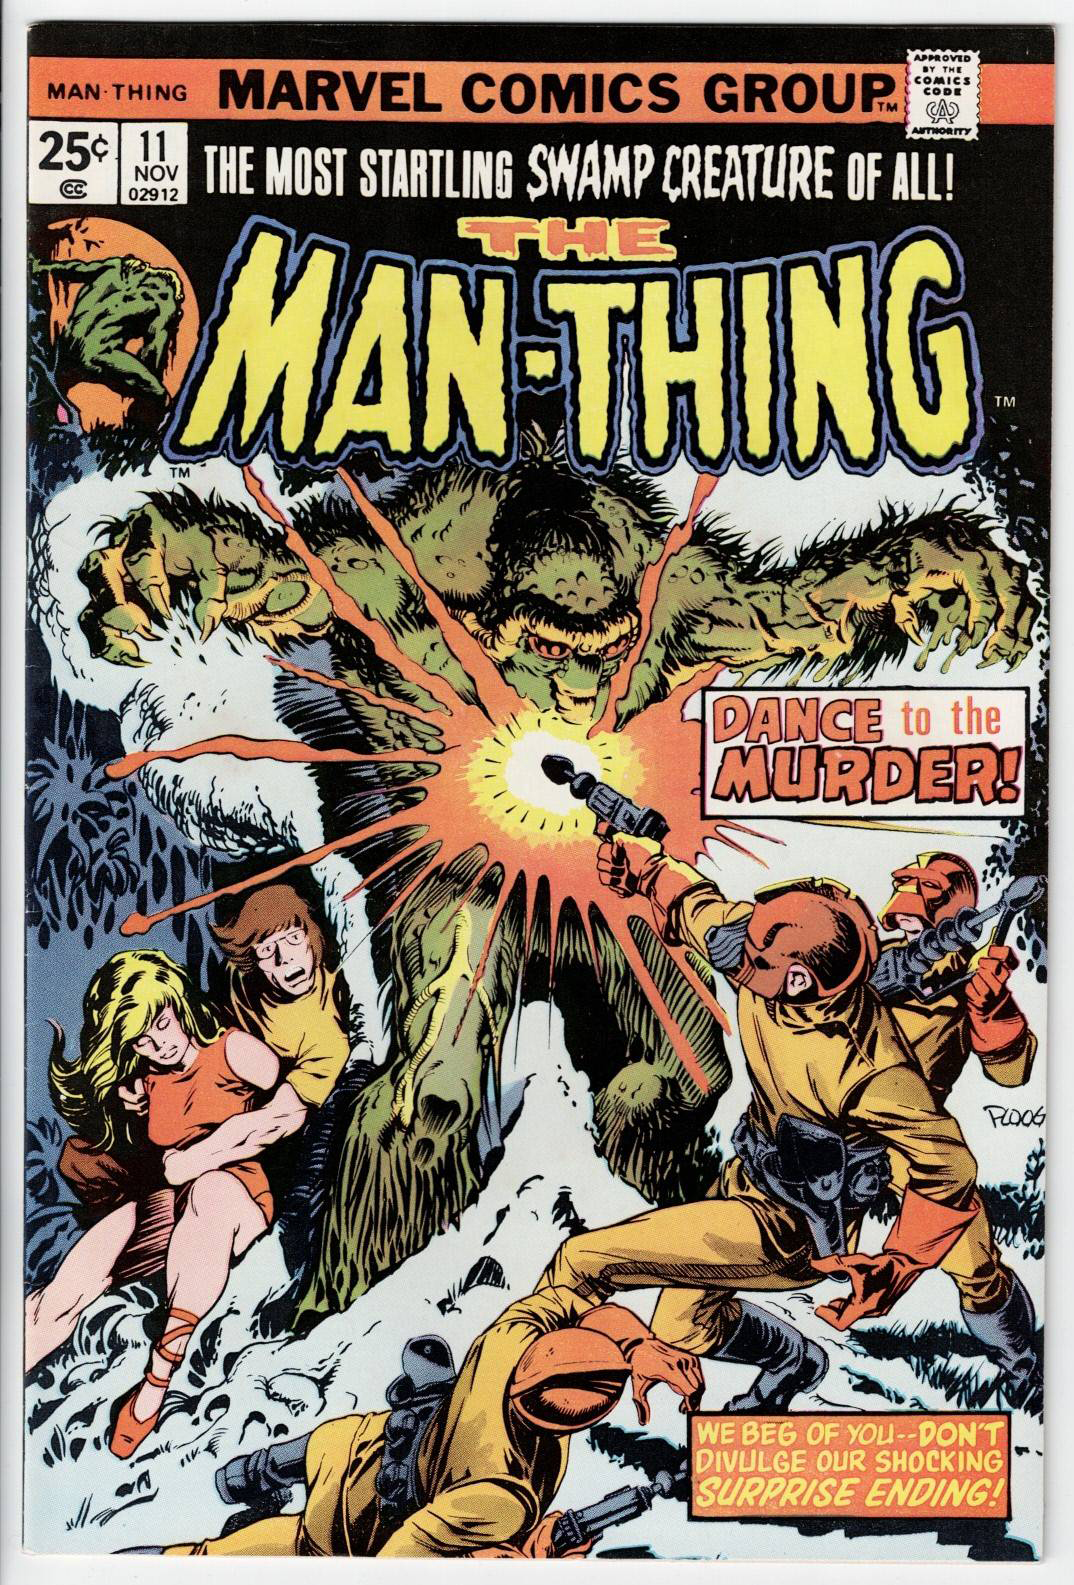 Man-Thing #11 front